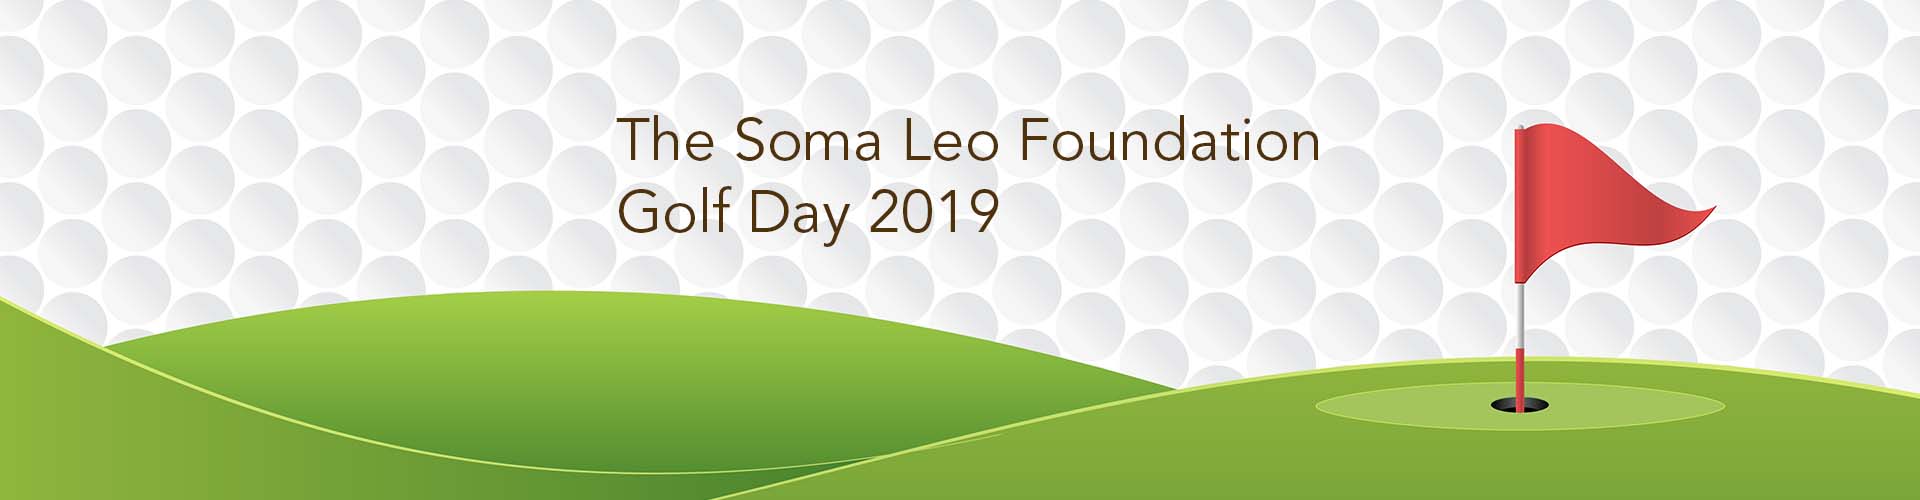 Charity golf day raises £4,000 for The Soma Leo Foundation